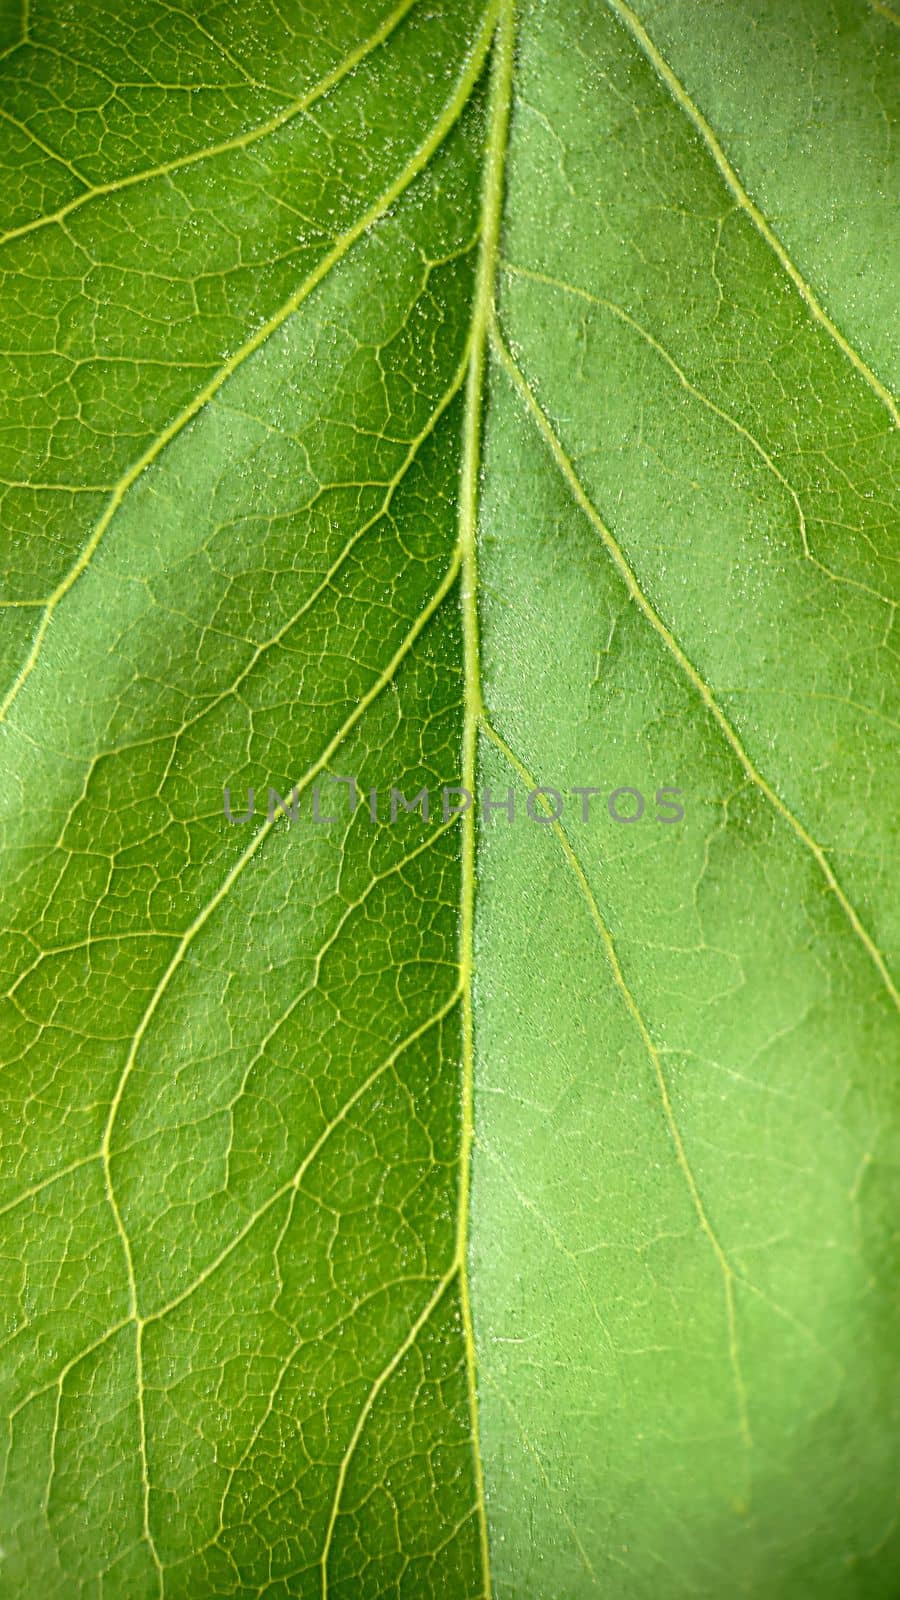 Green leaf with veins close-up.Texture or background